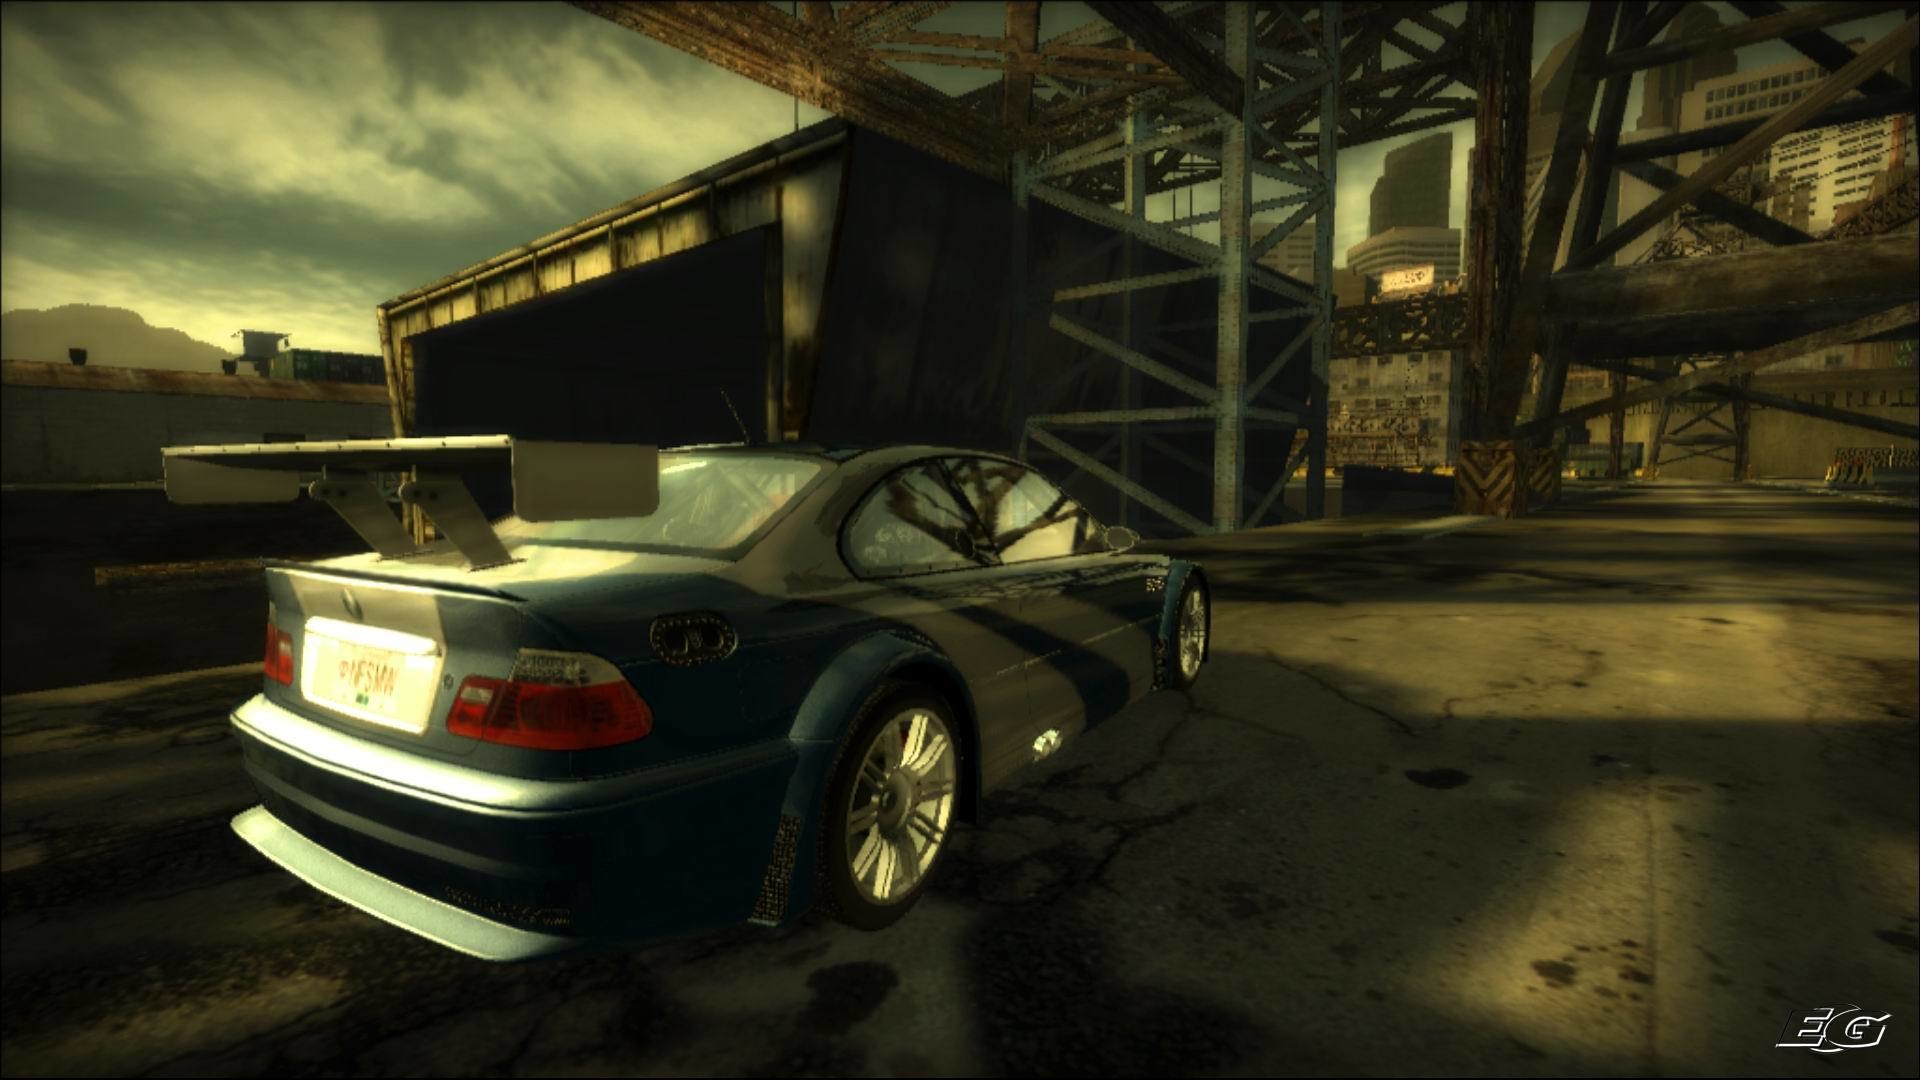 937491 BMW M3 E46 GTR, BMW, BMW 3 Series, sunset, Forza Horizon 4, BMW M3  E46, Drifting, fall, Need for Speed, BMW E46, Need for Speed: Most Wanted -  Rare Gallery HD Wallpapers